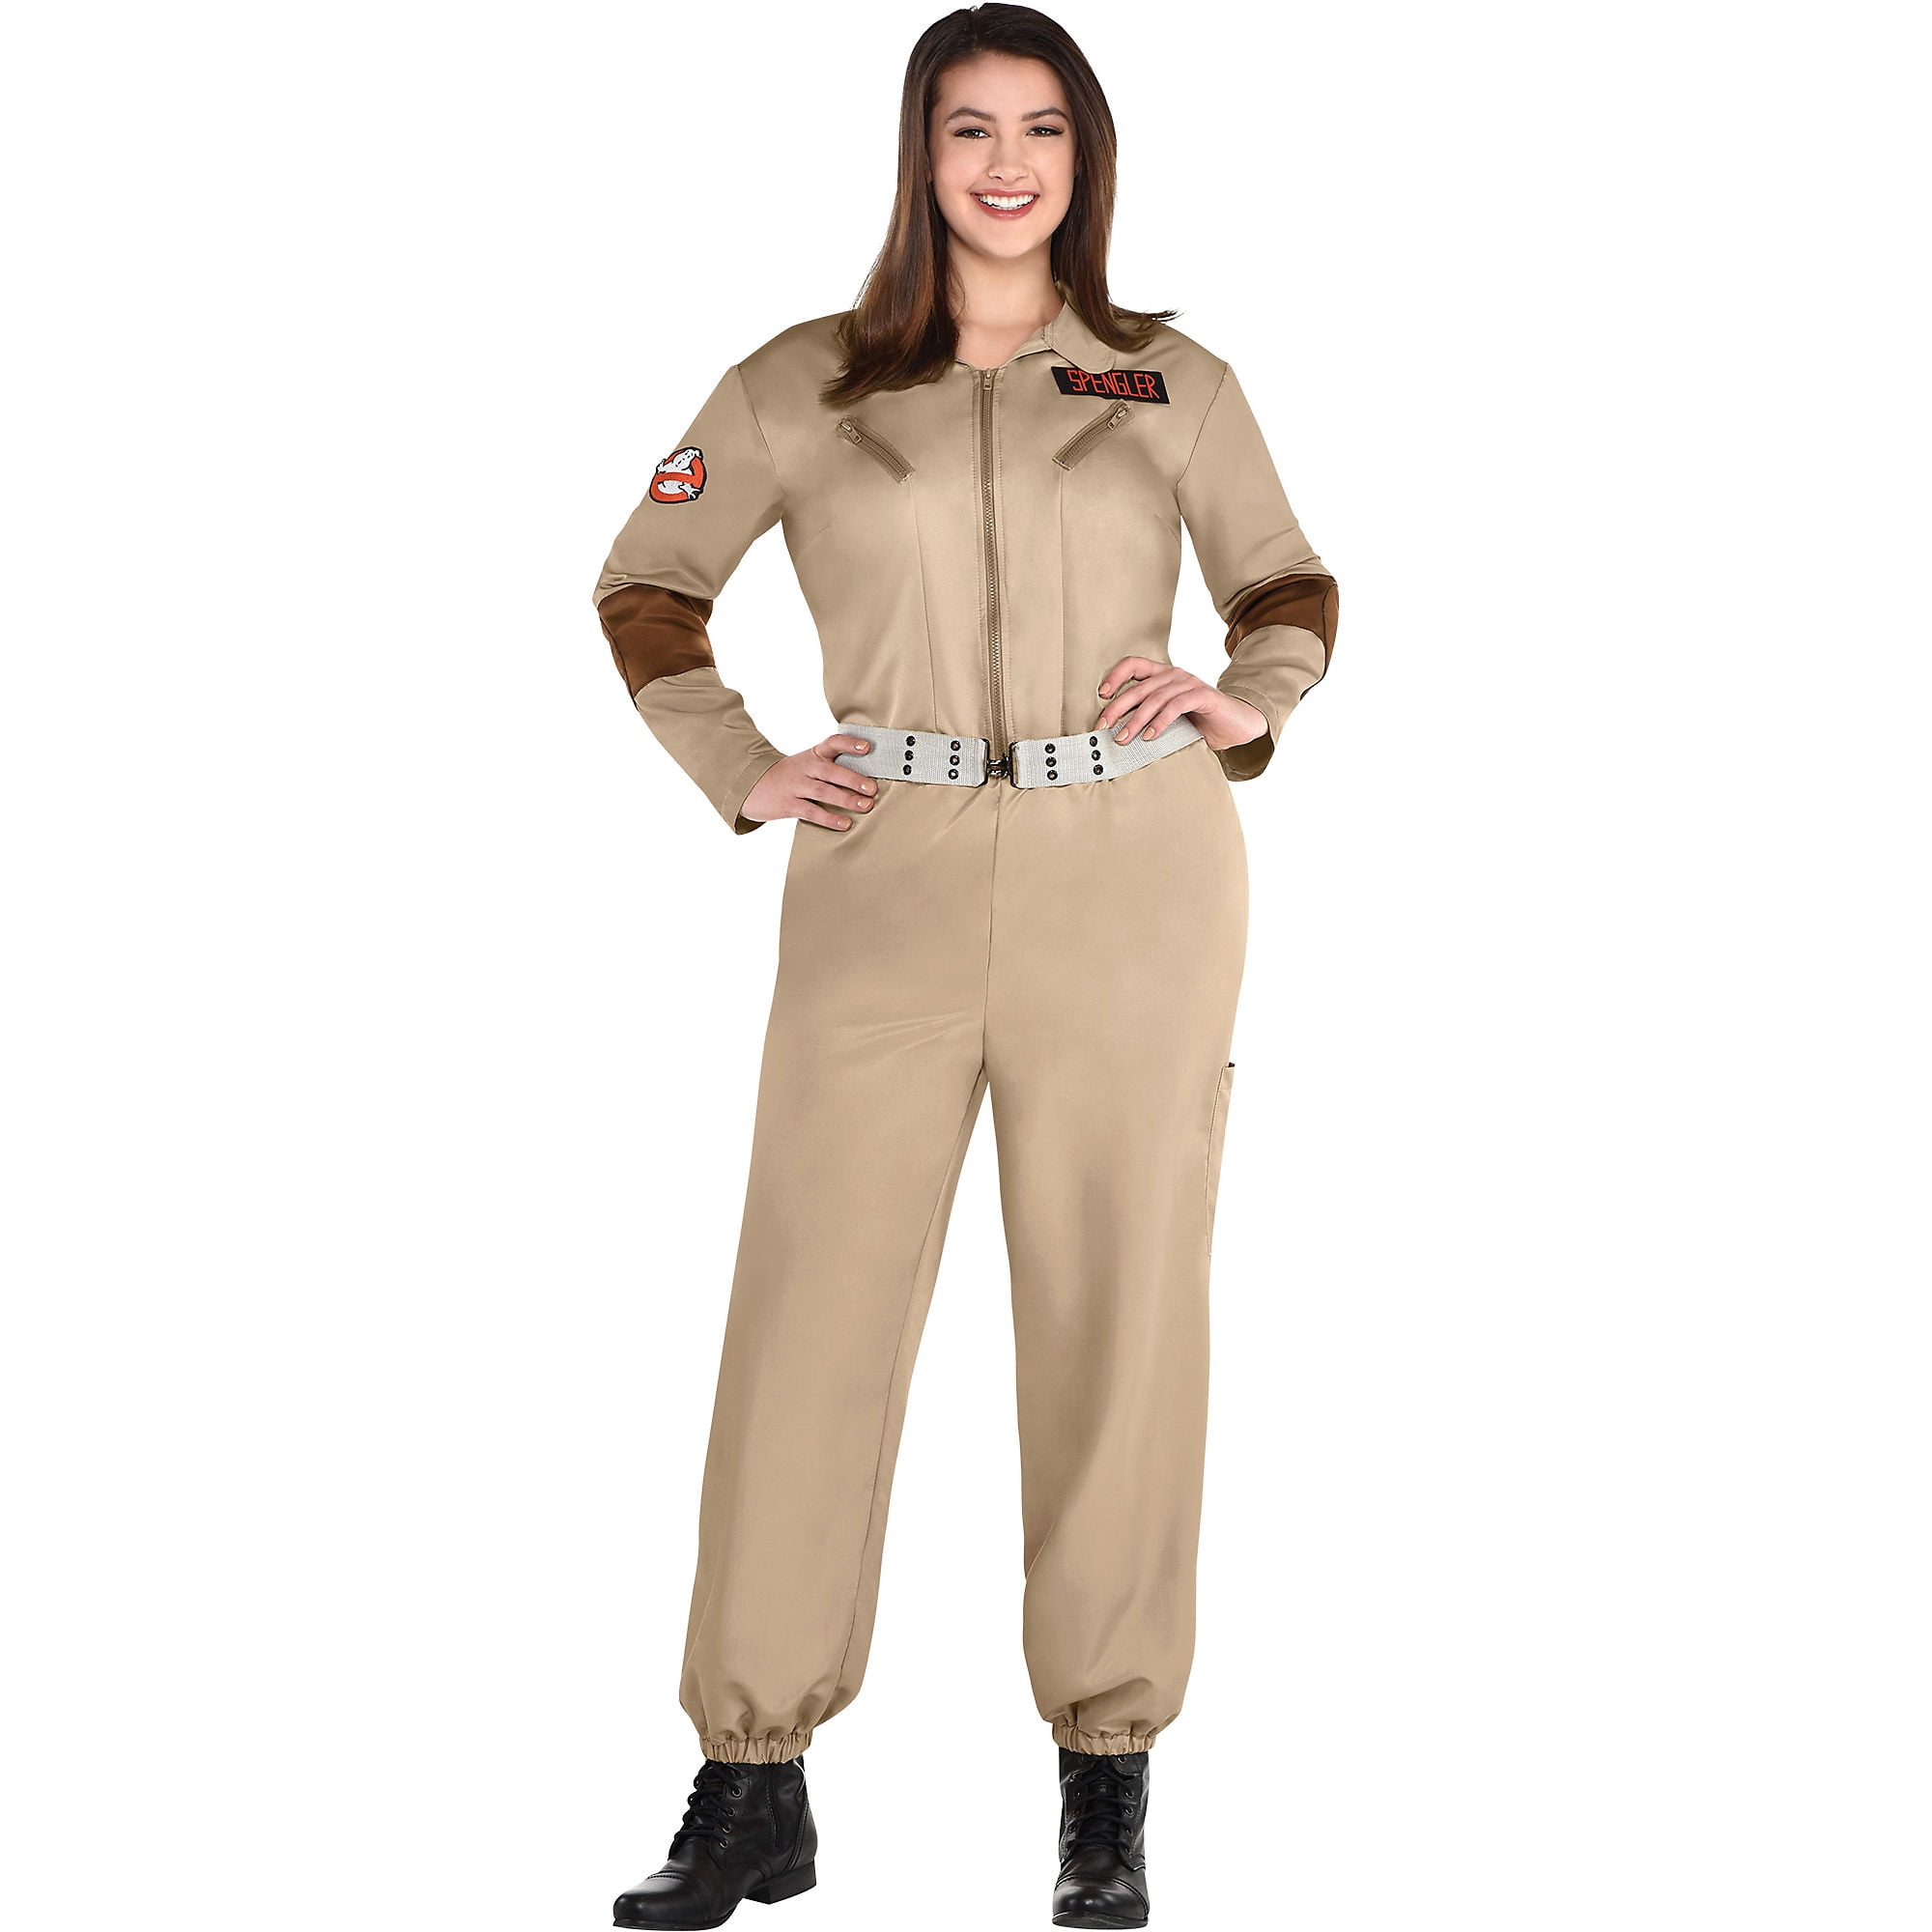 Ghostbuster Costume Halloween Costume Womens Adult Costume 1980s TV Med 